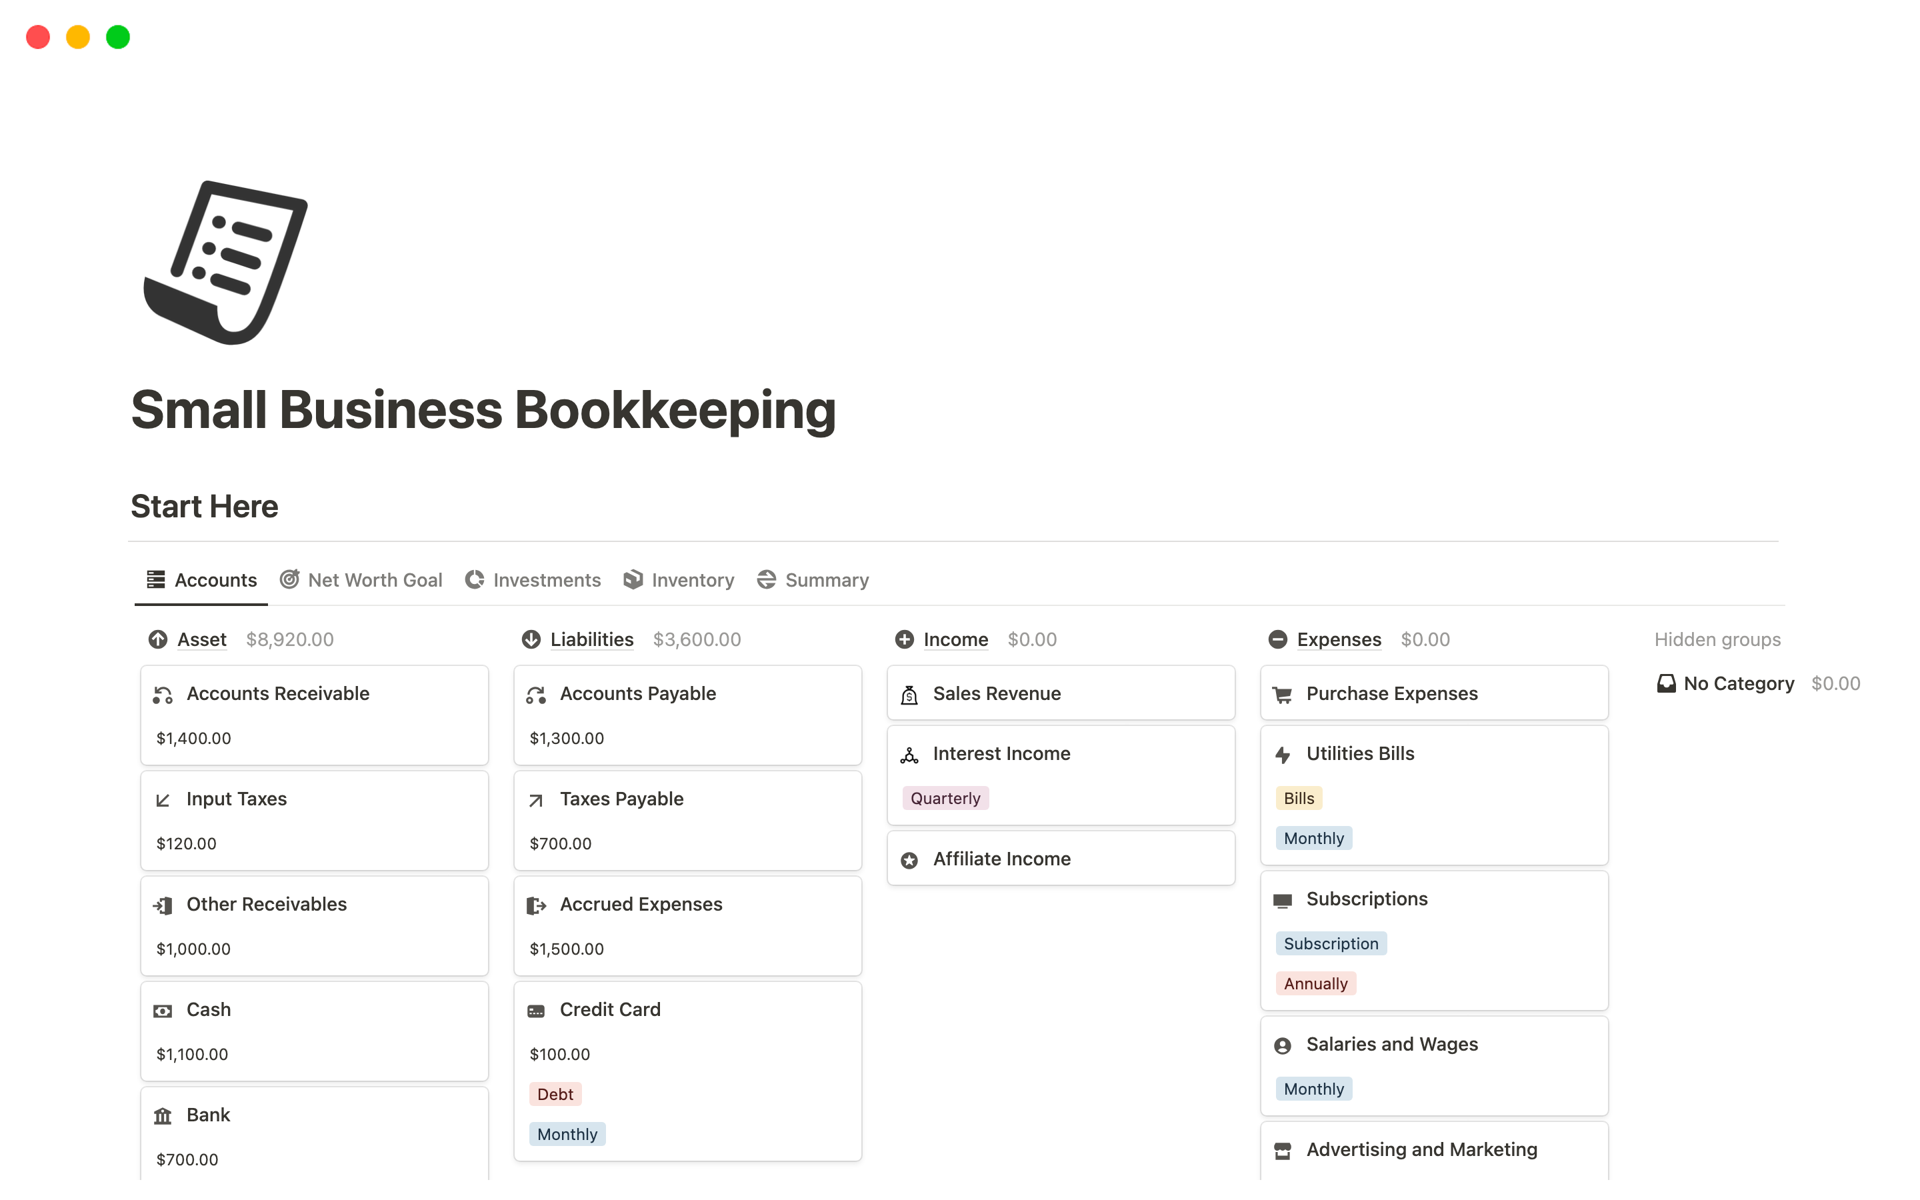 If you own a small business, this specialized small business bookkeeping template can help you manage business income, expenses, profits, manage inventory and gather tax-related information separately from your personal finances.